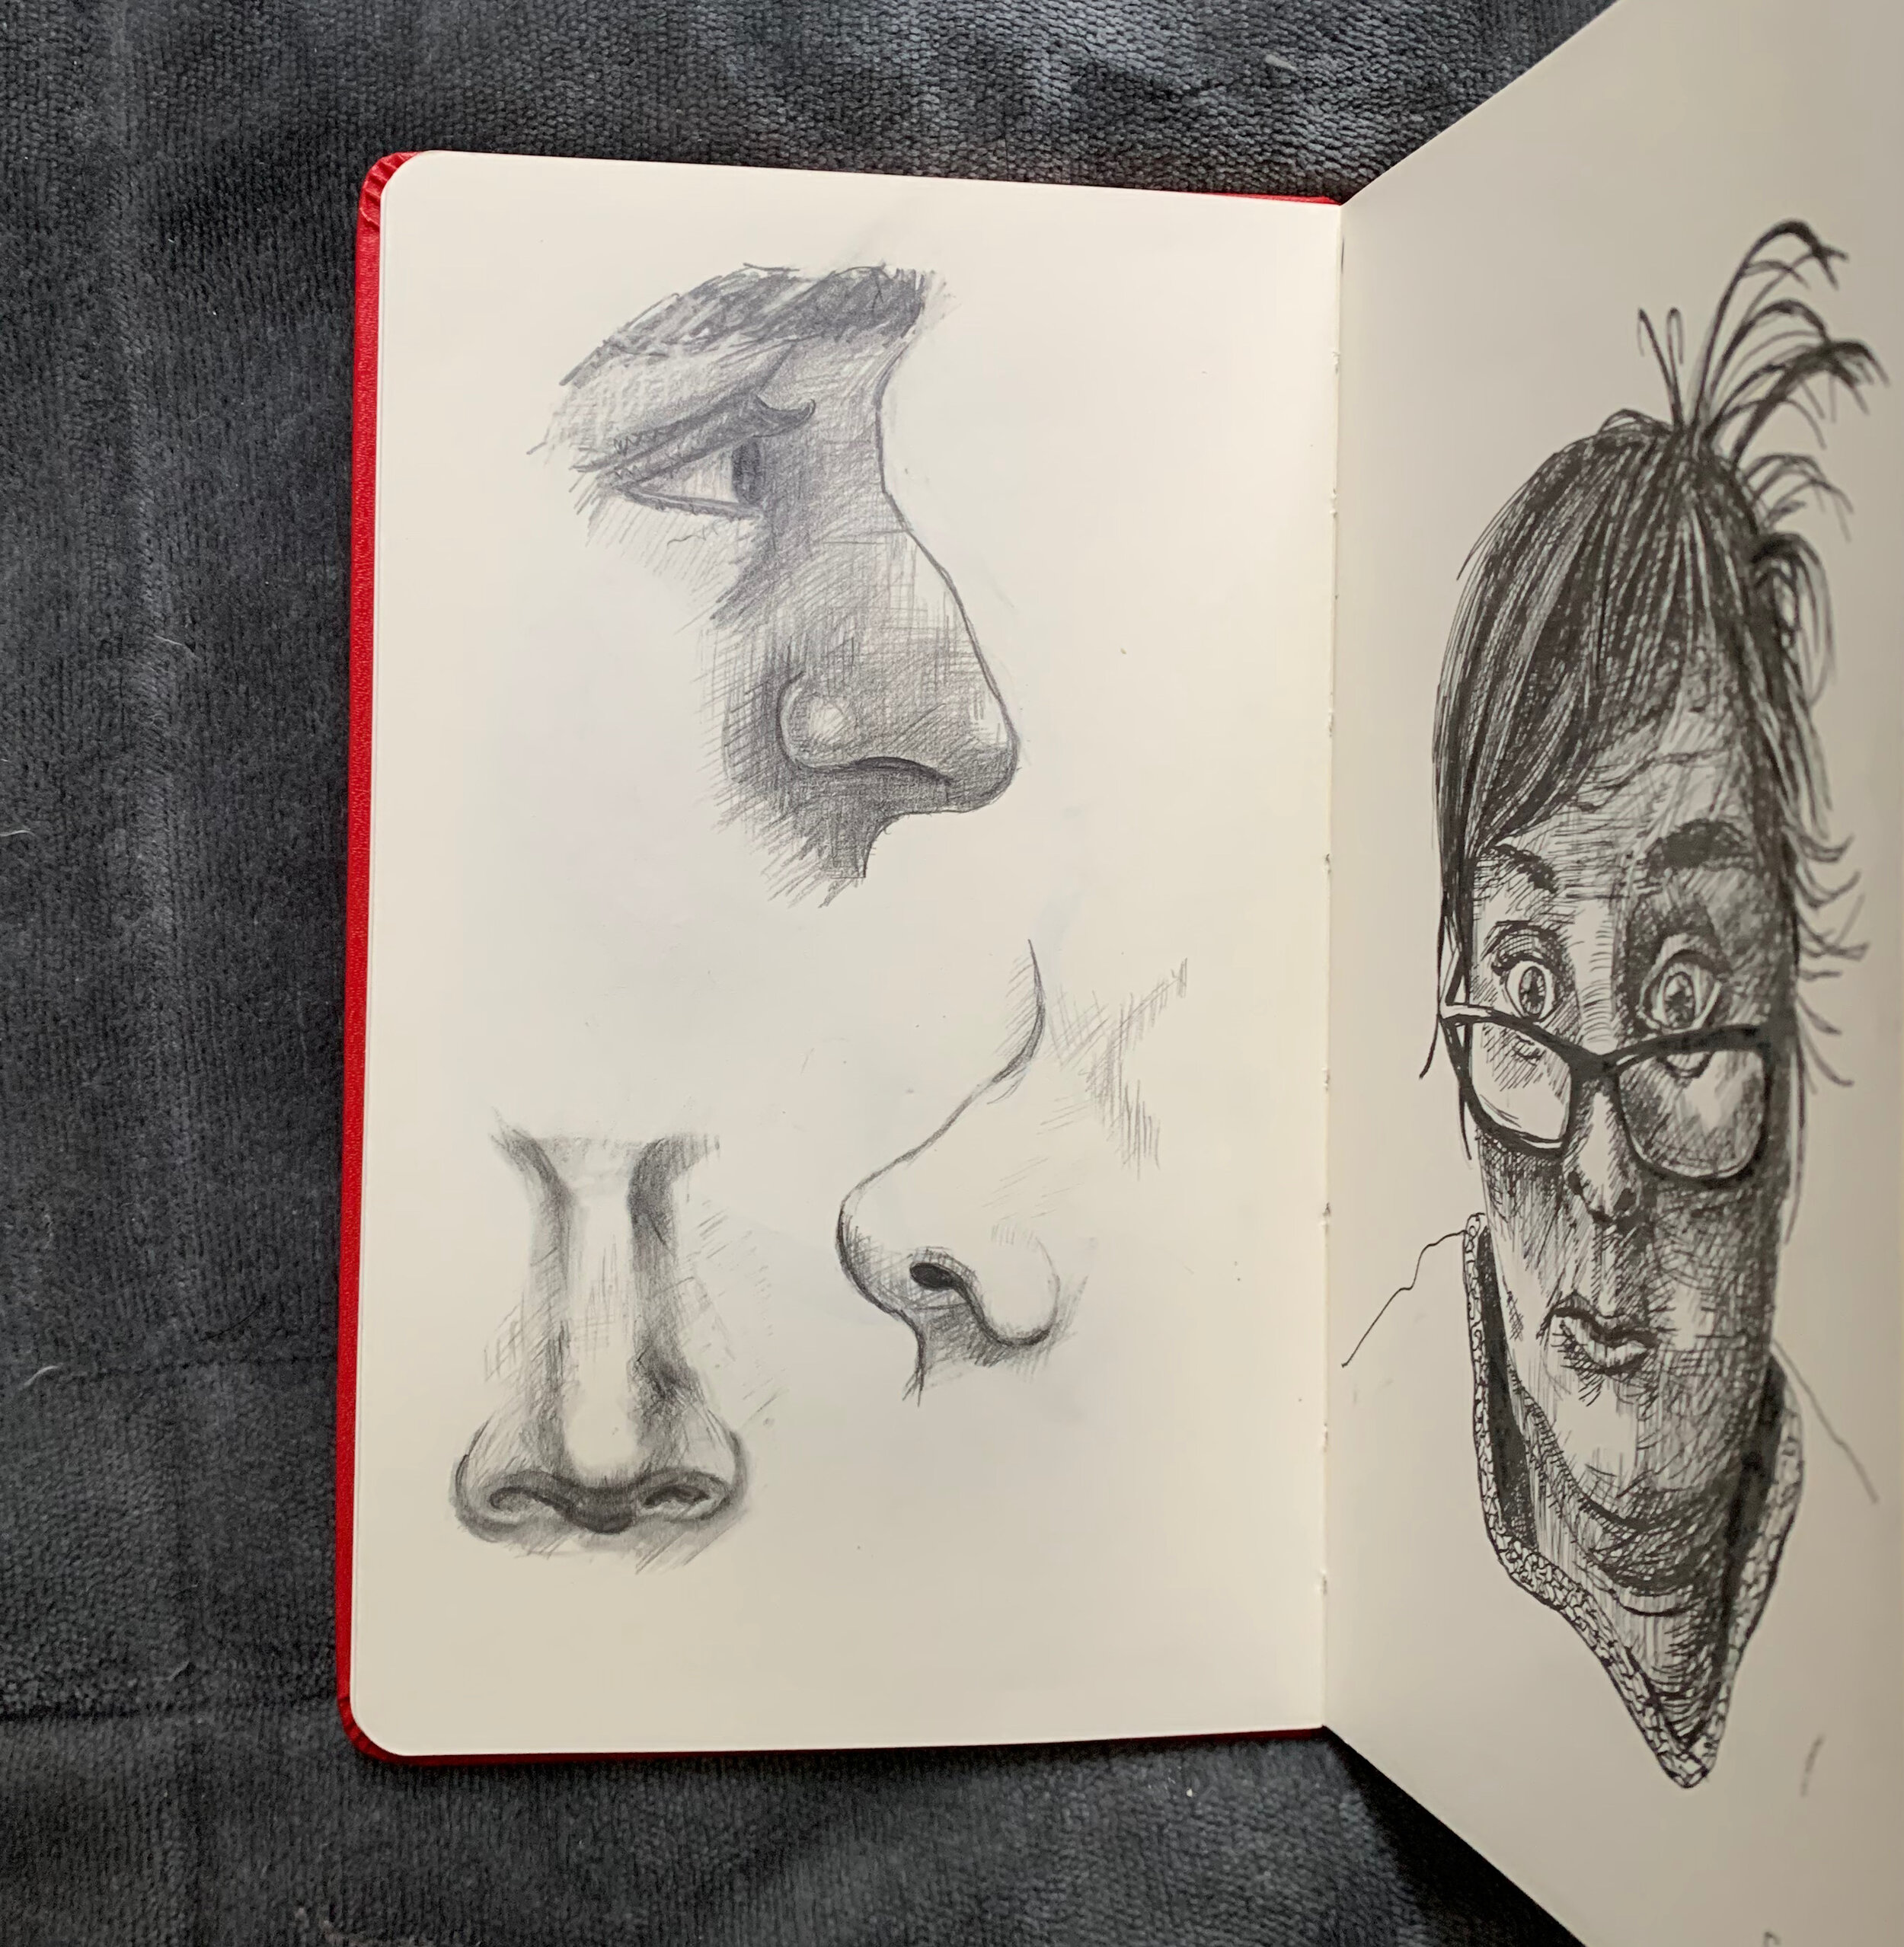 How to Draw a Face - A Step-by-Step Guide to Face Drawing